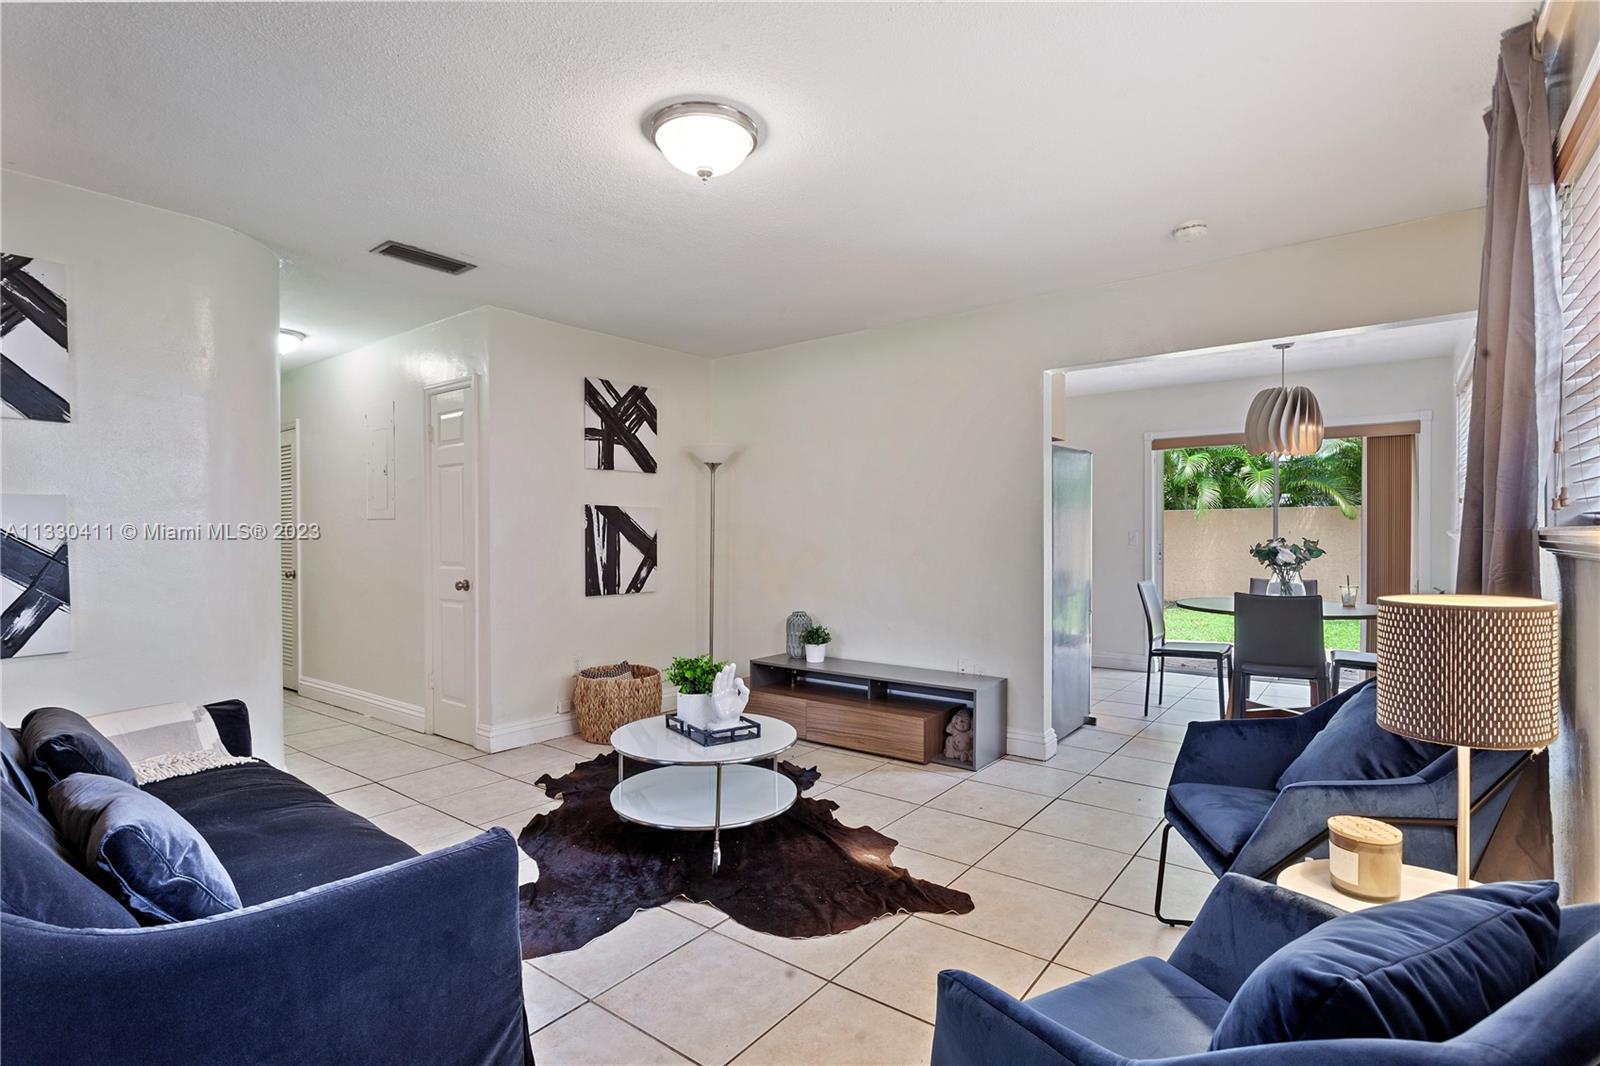 LOCATION! LOCATION! LOCATION! Very Large 2 bedroom/1 Bathroom apartment walking distance from Coco Walk, restaurants and shops in the heart of Coconut Grove. The apartment has a private backyard as well! Parking for 2 cars! Available for short term rental as well.